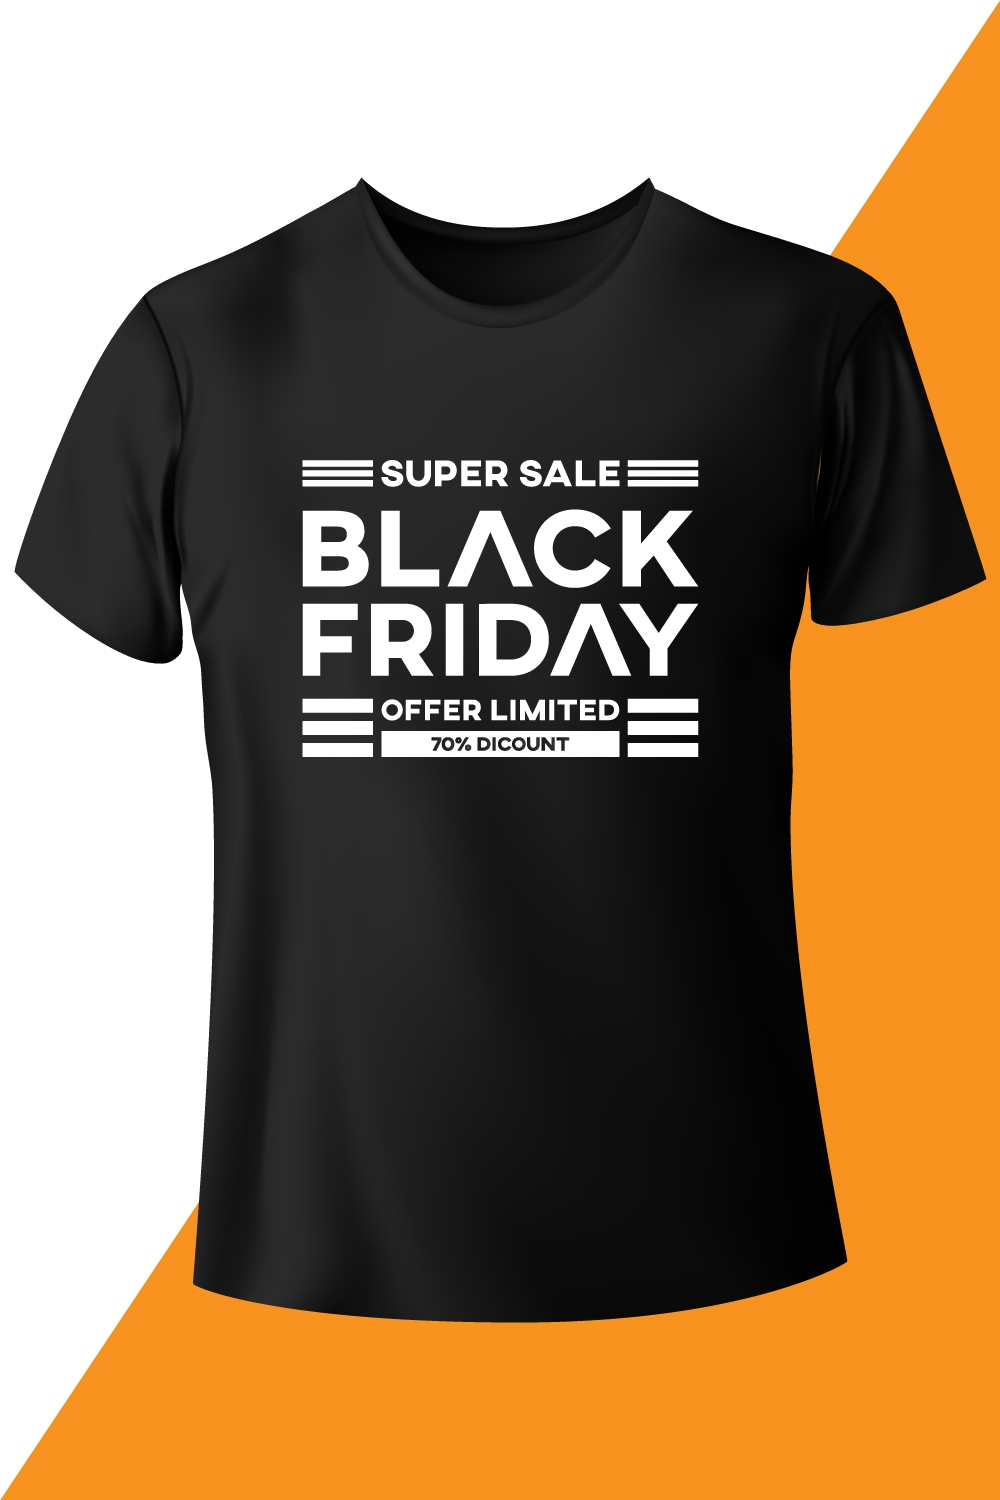 Image of a black t-shirt with a great Black Friday lettering.